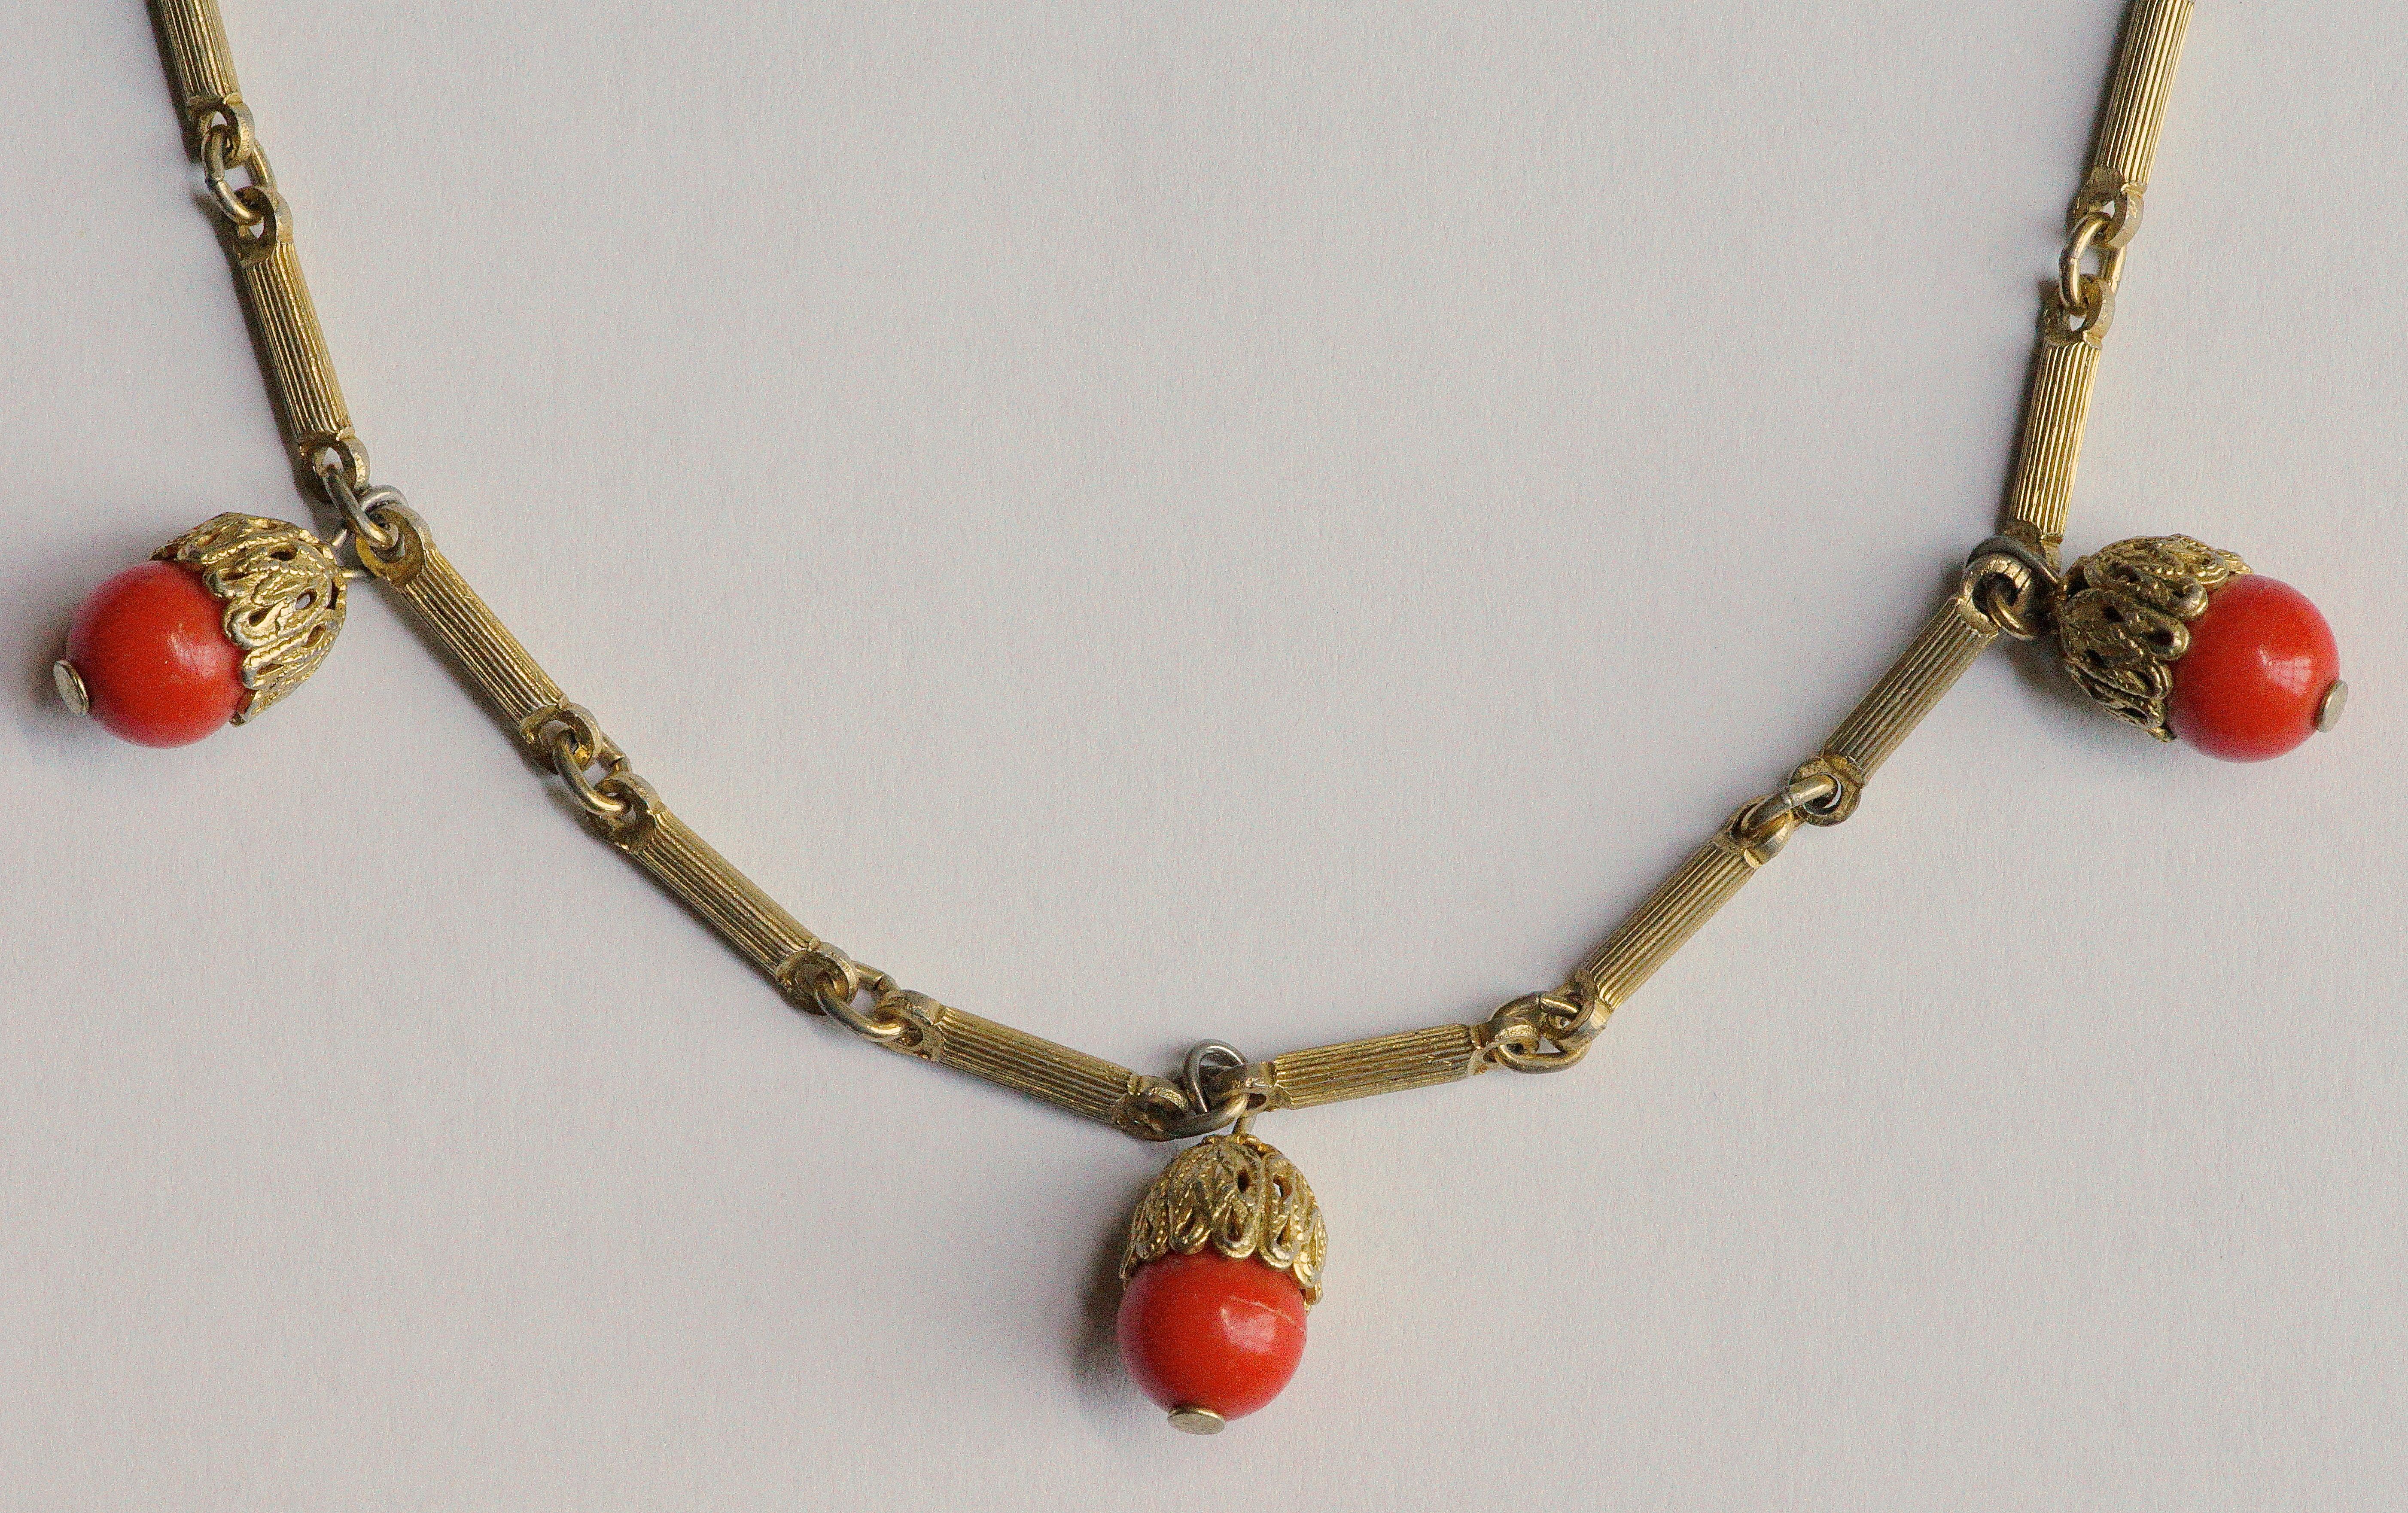 Long gold tone necklace with ridged detail links, and featuring fine filigree metal work set with faux coral stones. Length 123cm / 48.42 inches, and the faux coral stones are 7.5mm / .29 inch diameter. There is one stone missing close to the clasp.